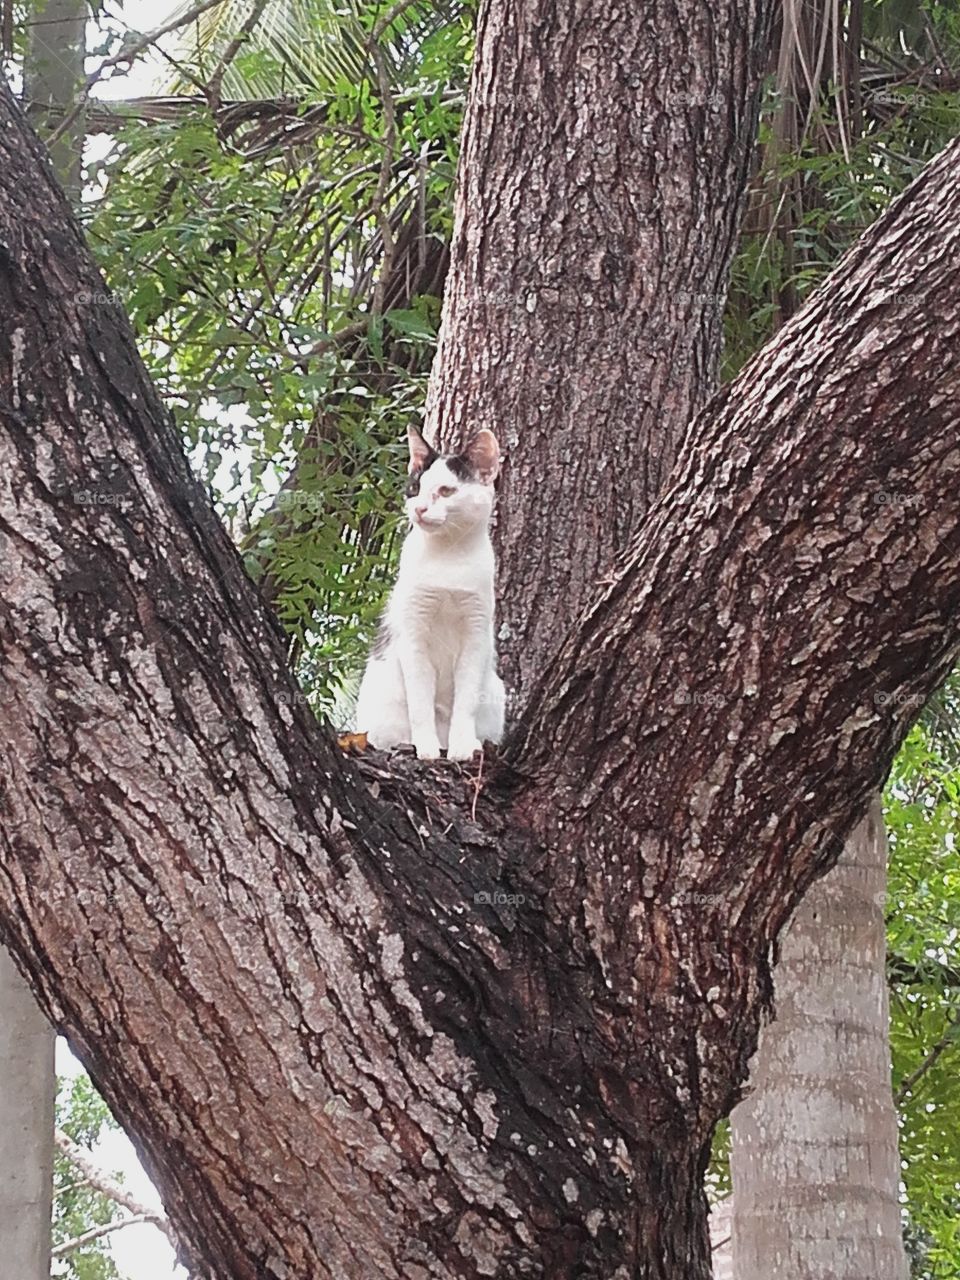 Cute cat on the tree